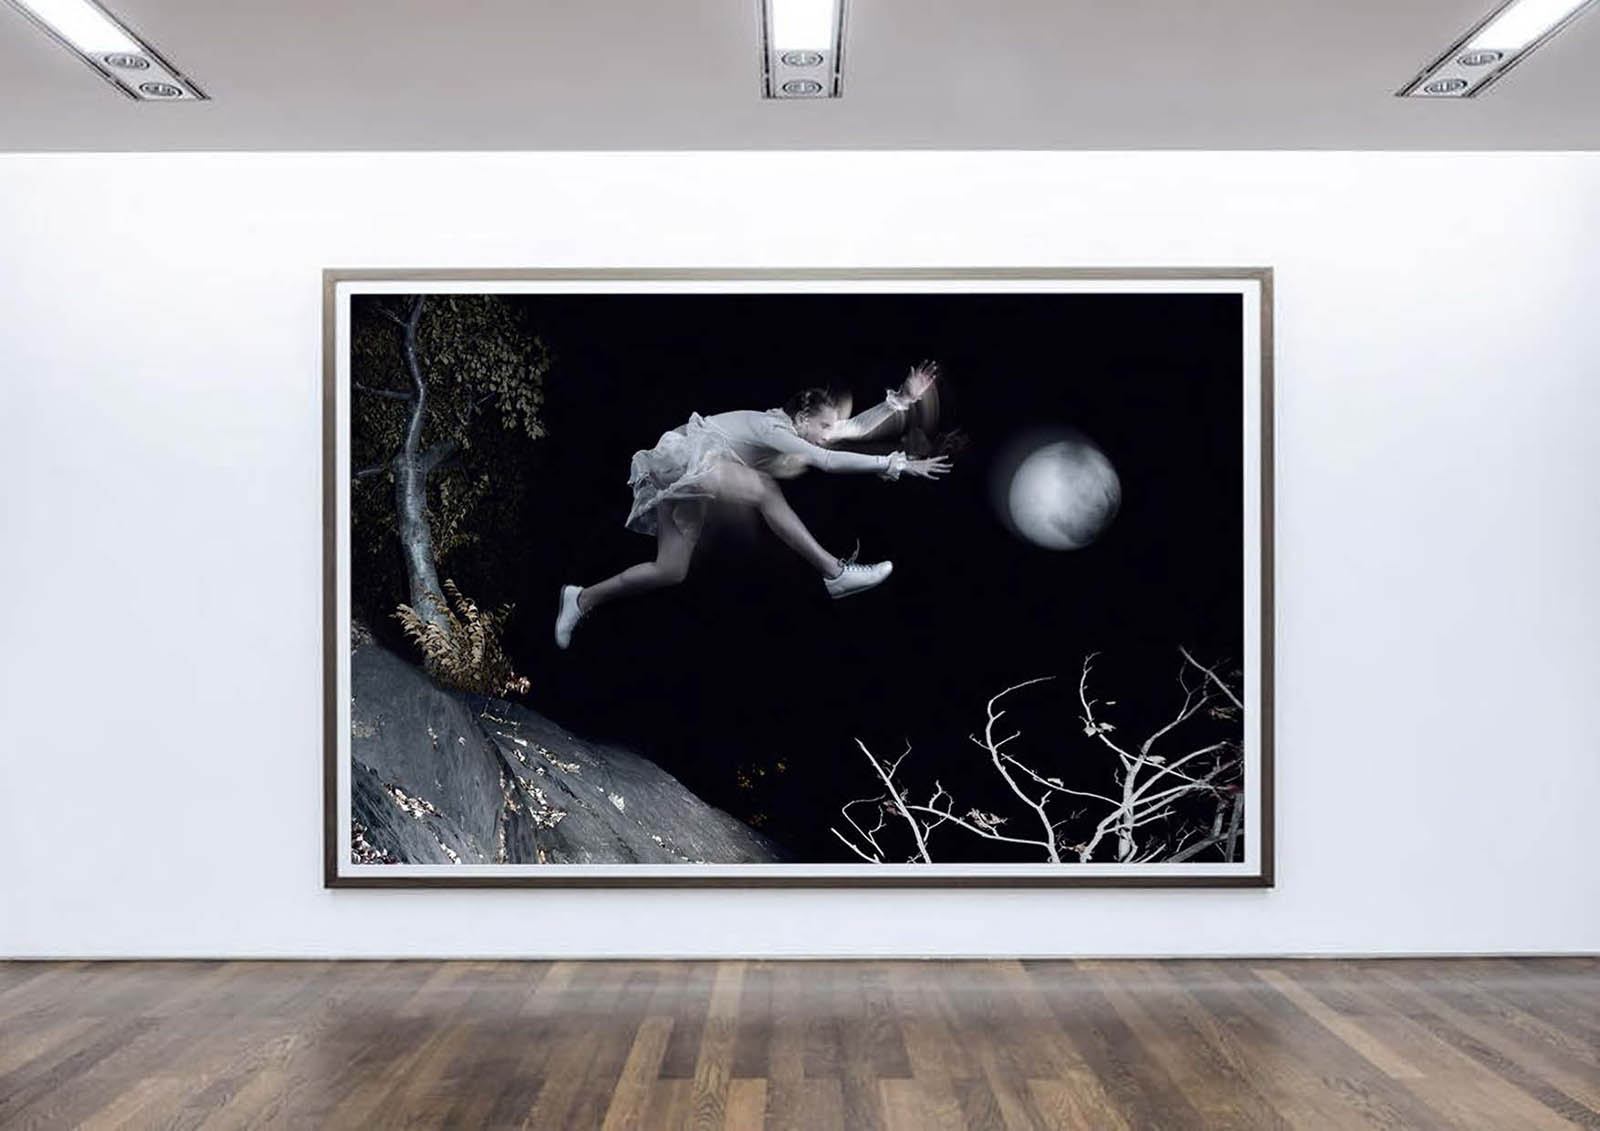 contemporary art photography, figurative series Awakening by American artist Tim White-Sobieski, large scale artworks exhibited at Museum of Contemporary art, ICP and Kunstalle museum